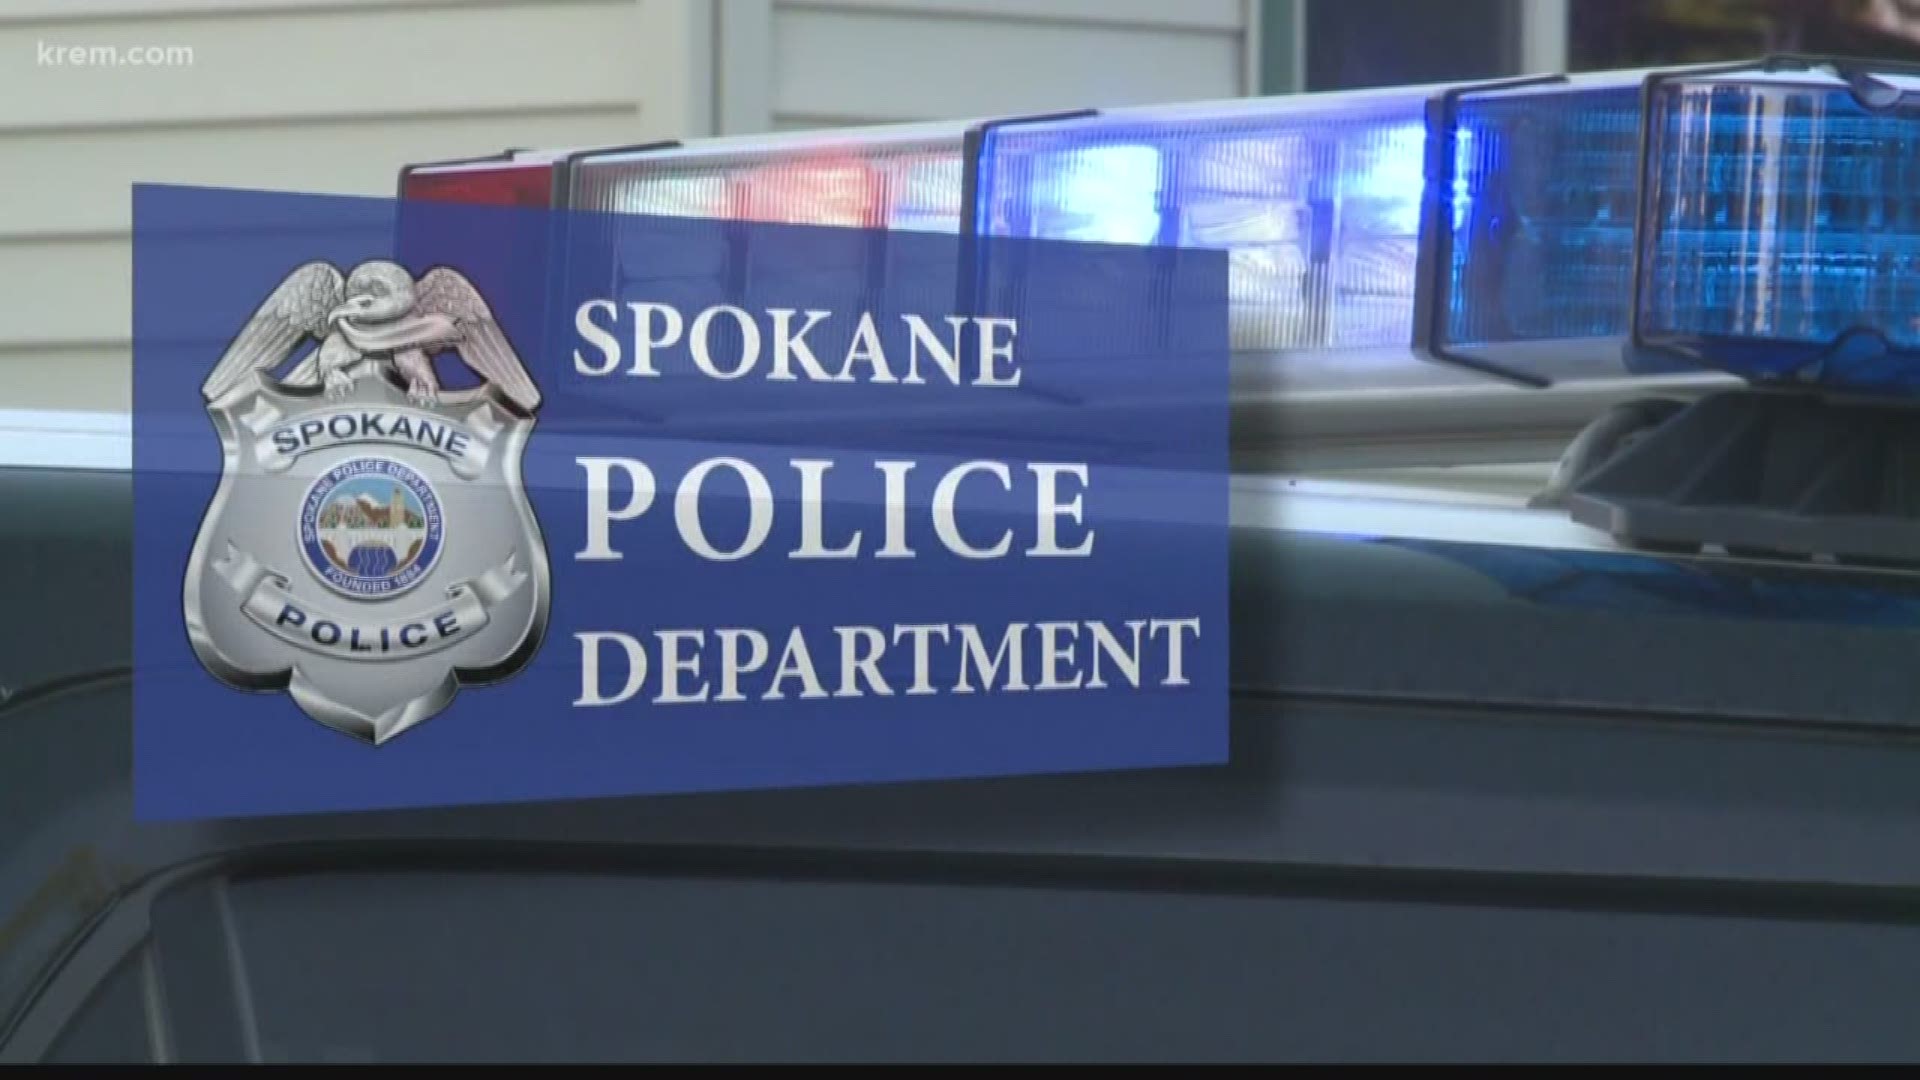 The Spokane Police Department says its seeing an increase in the number of complaints coming from the Office of Police Ombudsman.